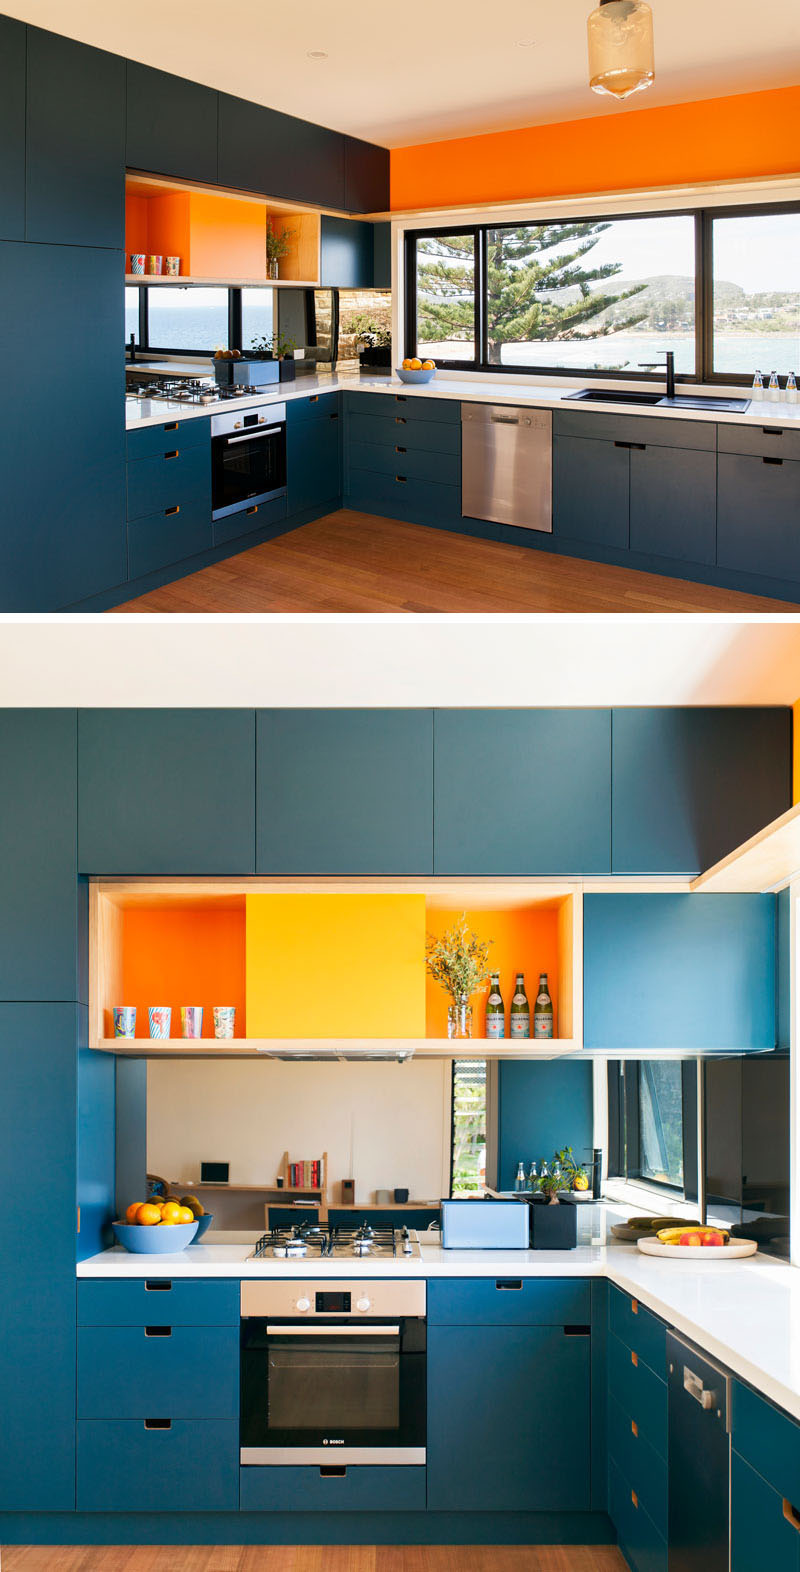 Color isn't shied away from in this bright and modern kitchen that features all blue cabinetry and bright orange accents.